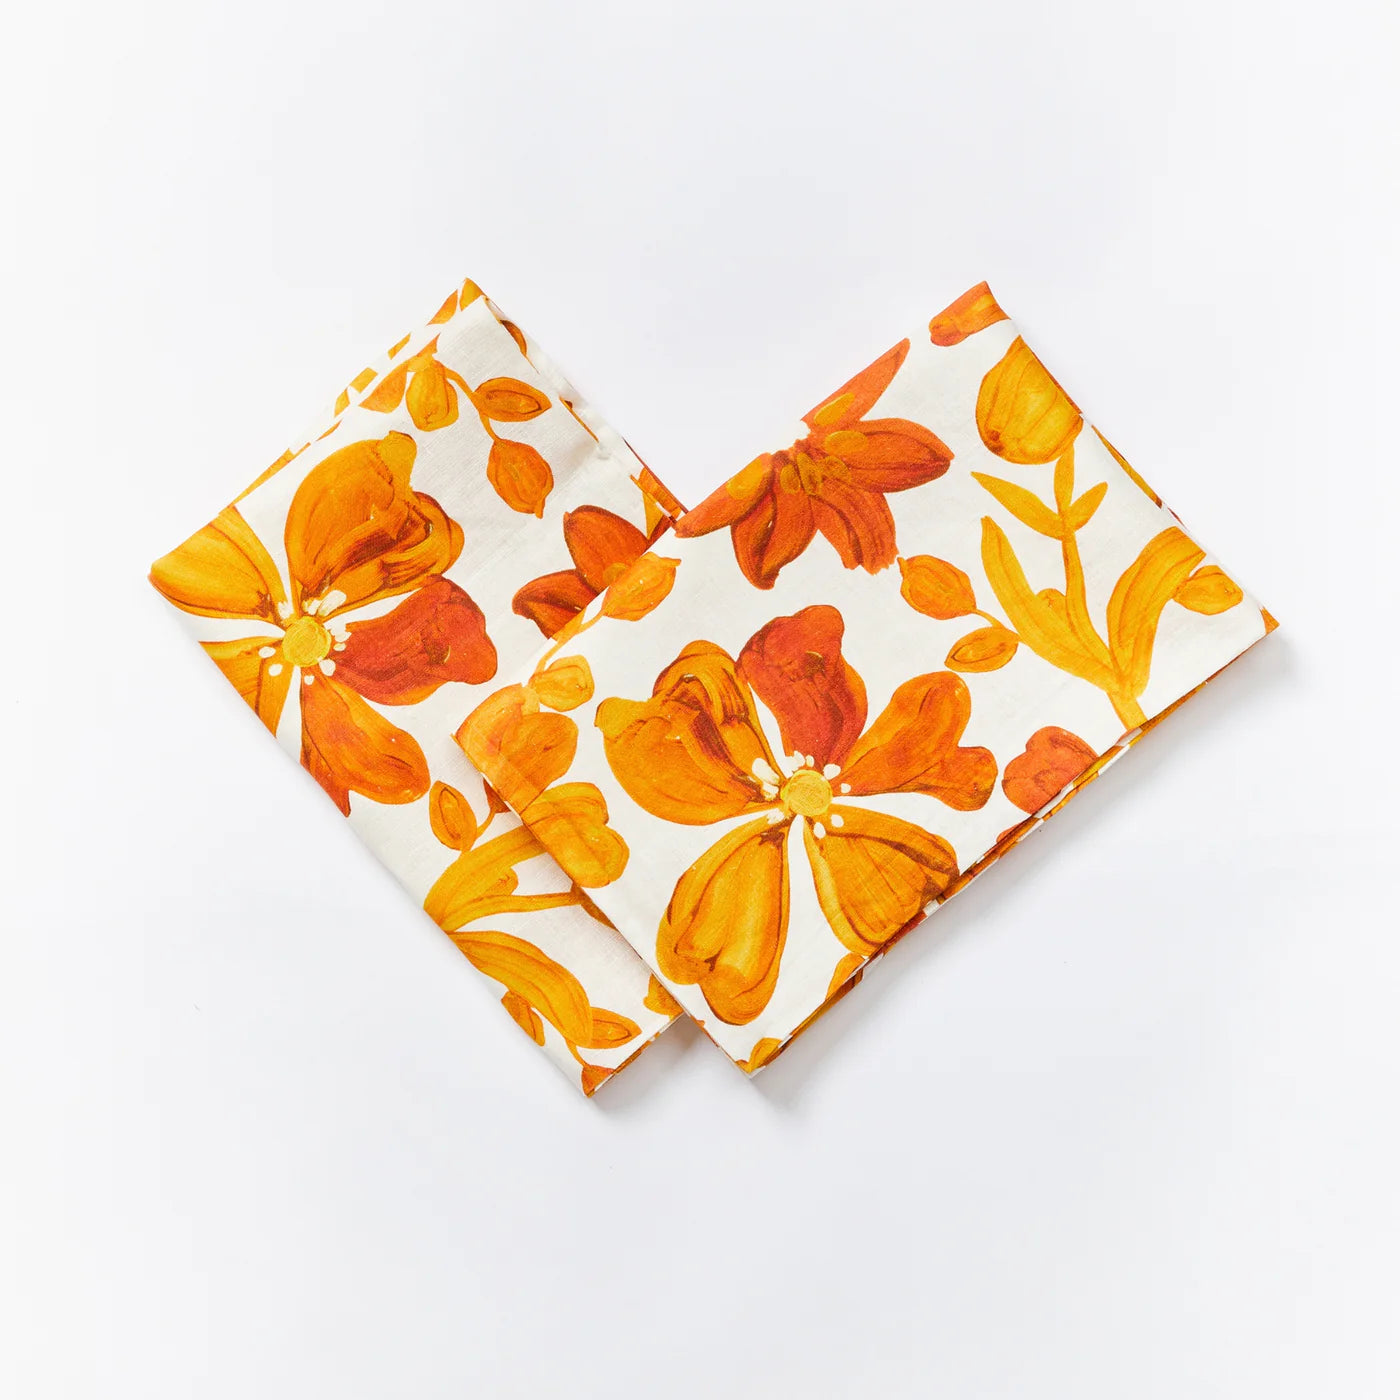 Small Dogwood Rust Pillowcases - Set of Two